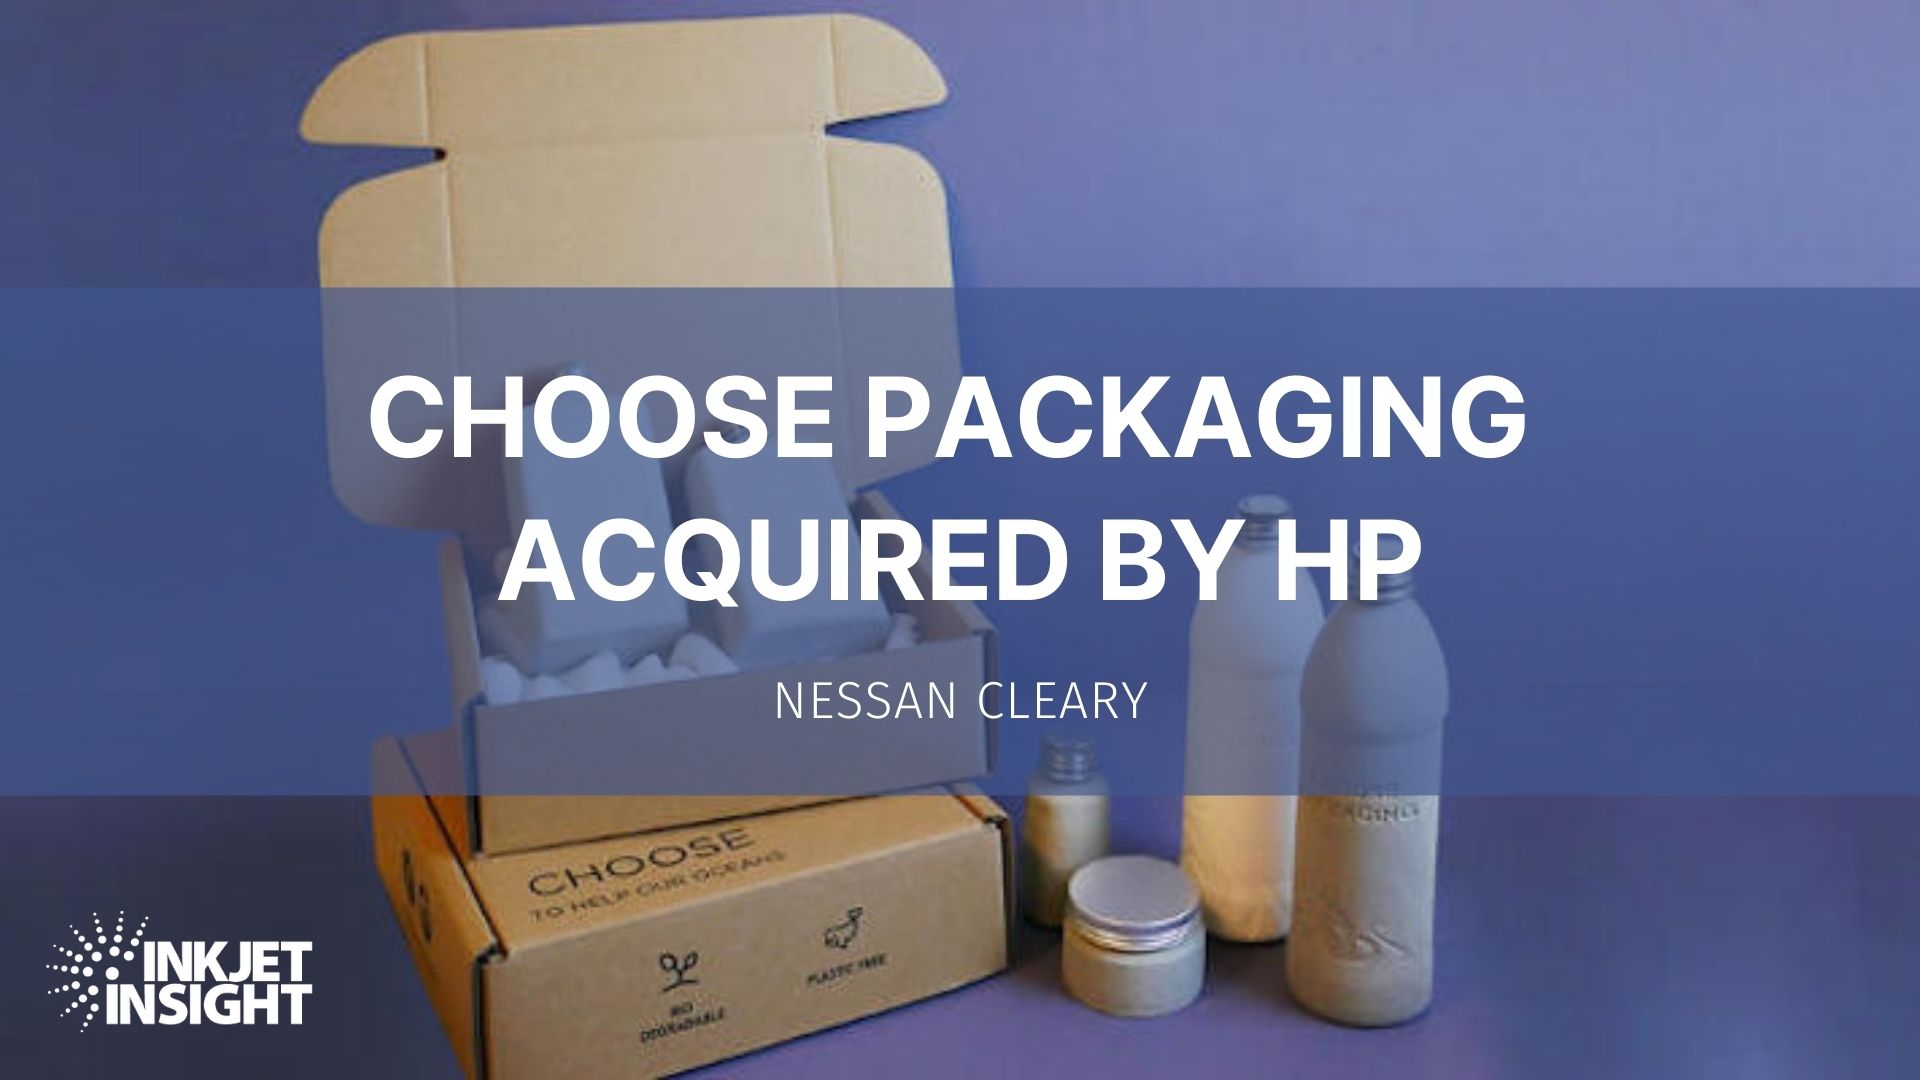 Featured image for “Choose Packaging Acquired by HP”